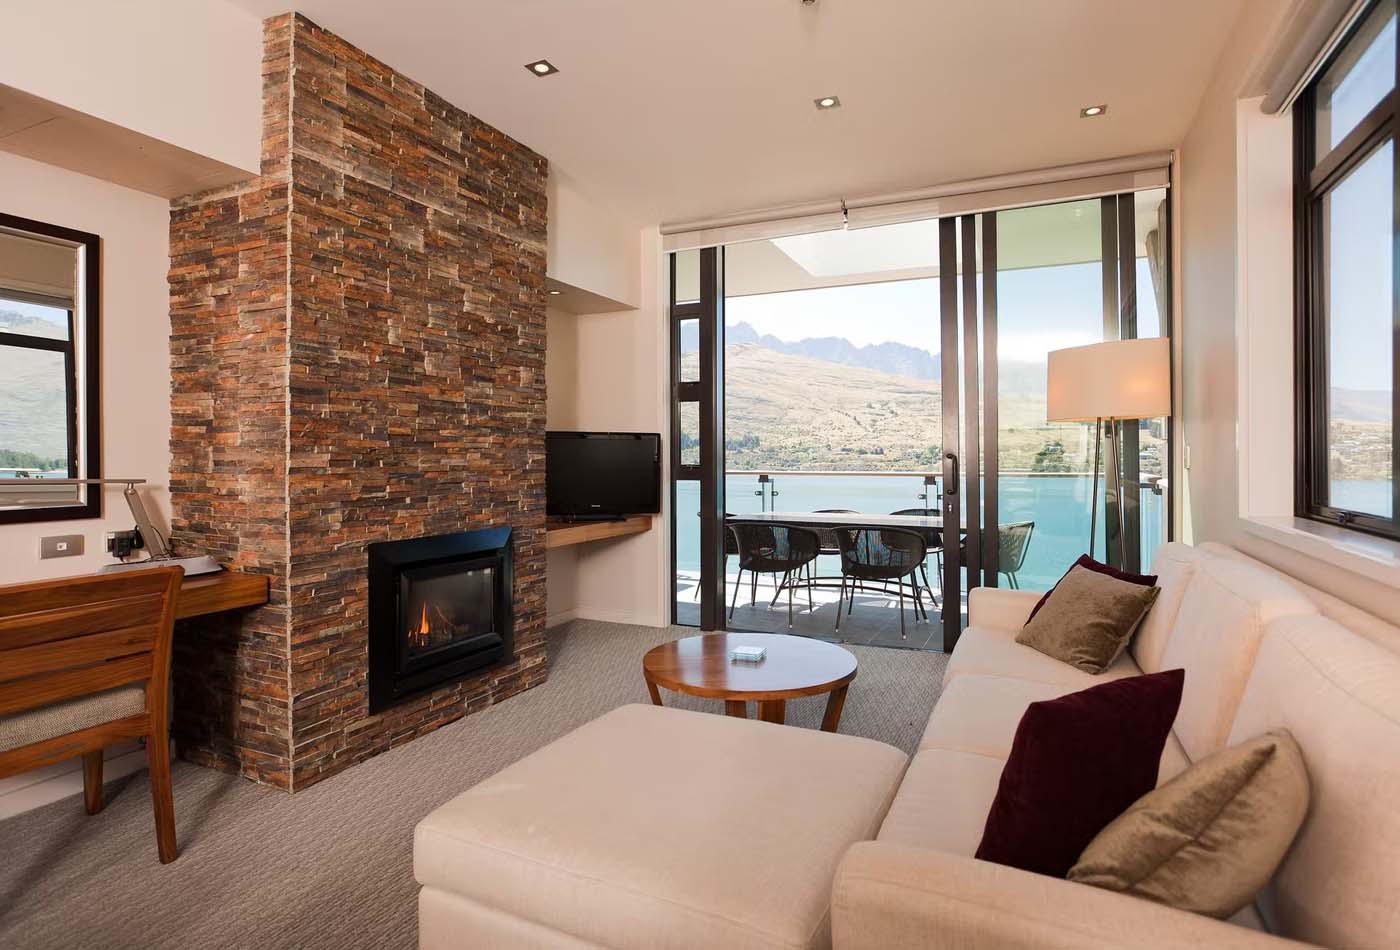 Apartment living room and balcony at the Rees Hotel, New Zealand